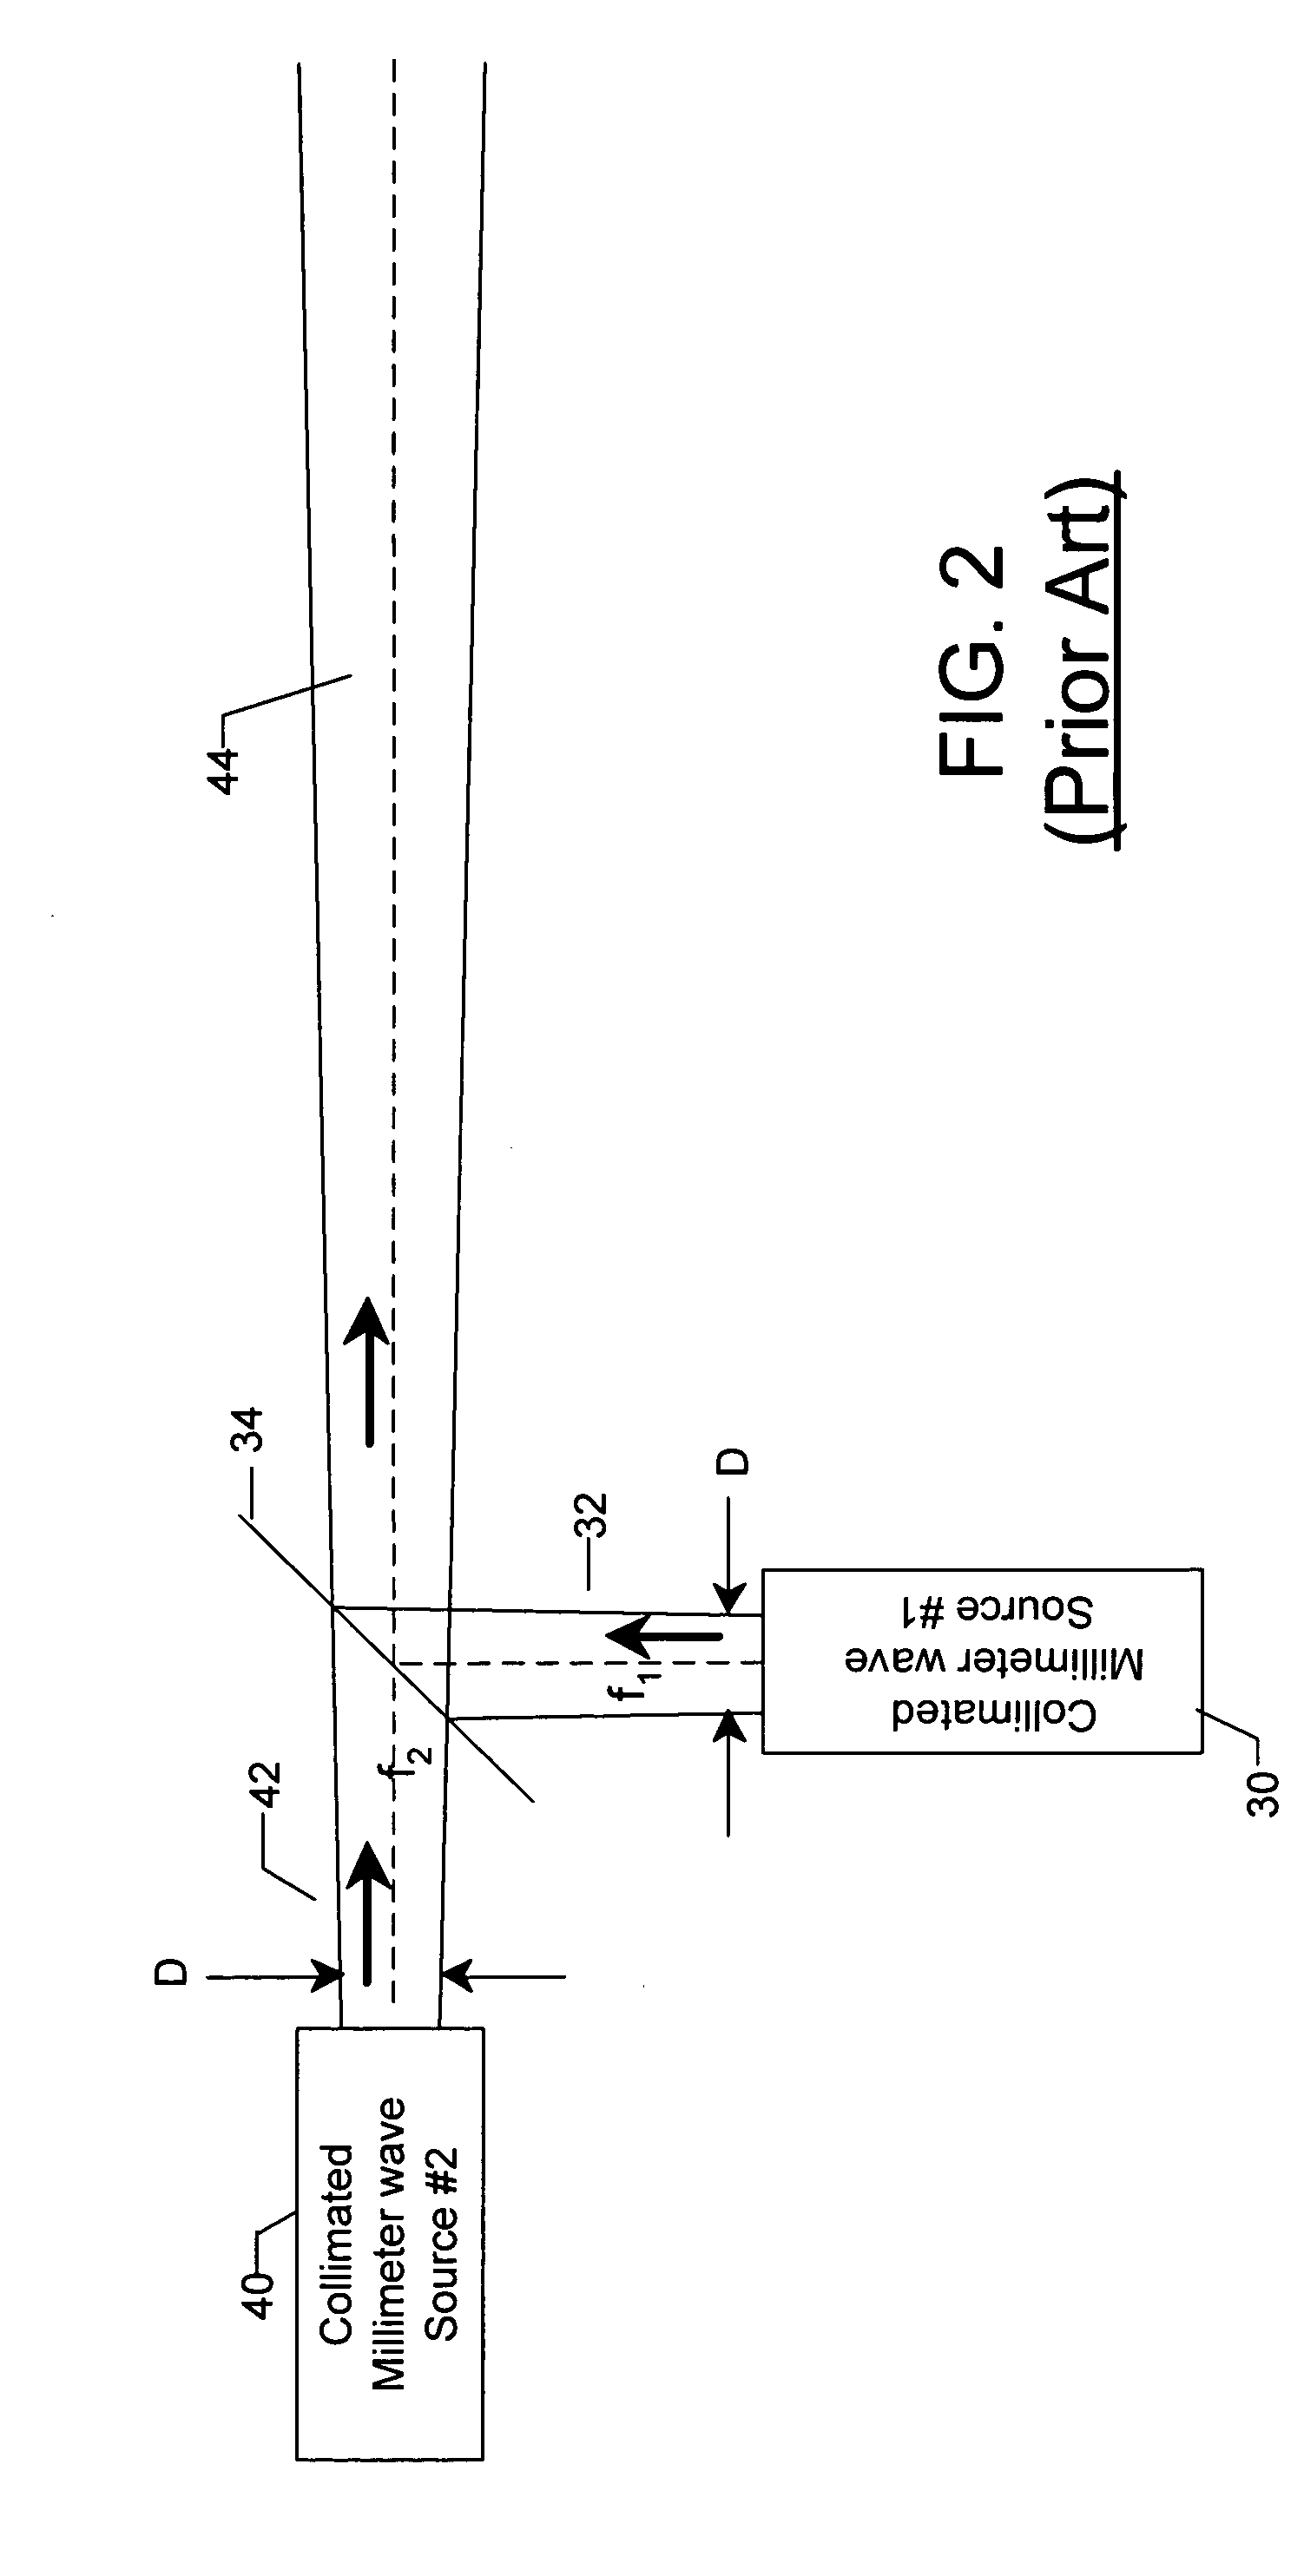 Two-dimensional dual-frequency antenna and associated down-conversion method